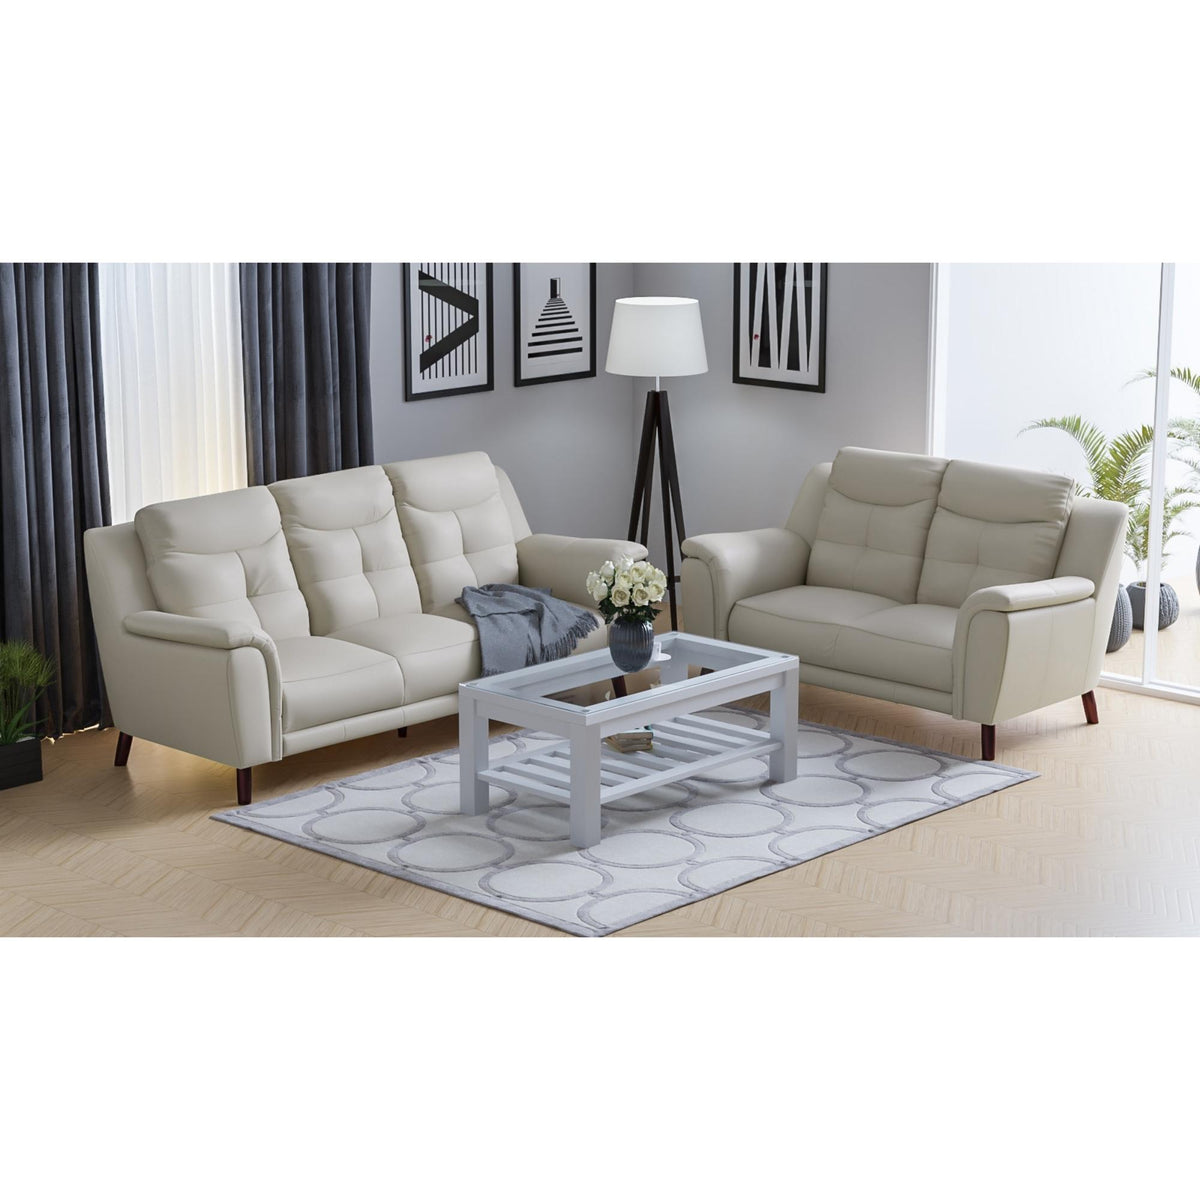 Opal 3 Seater Leather Sofa Silver 